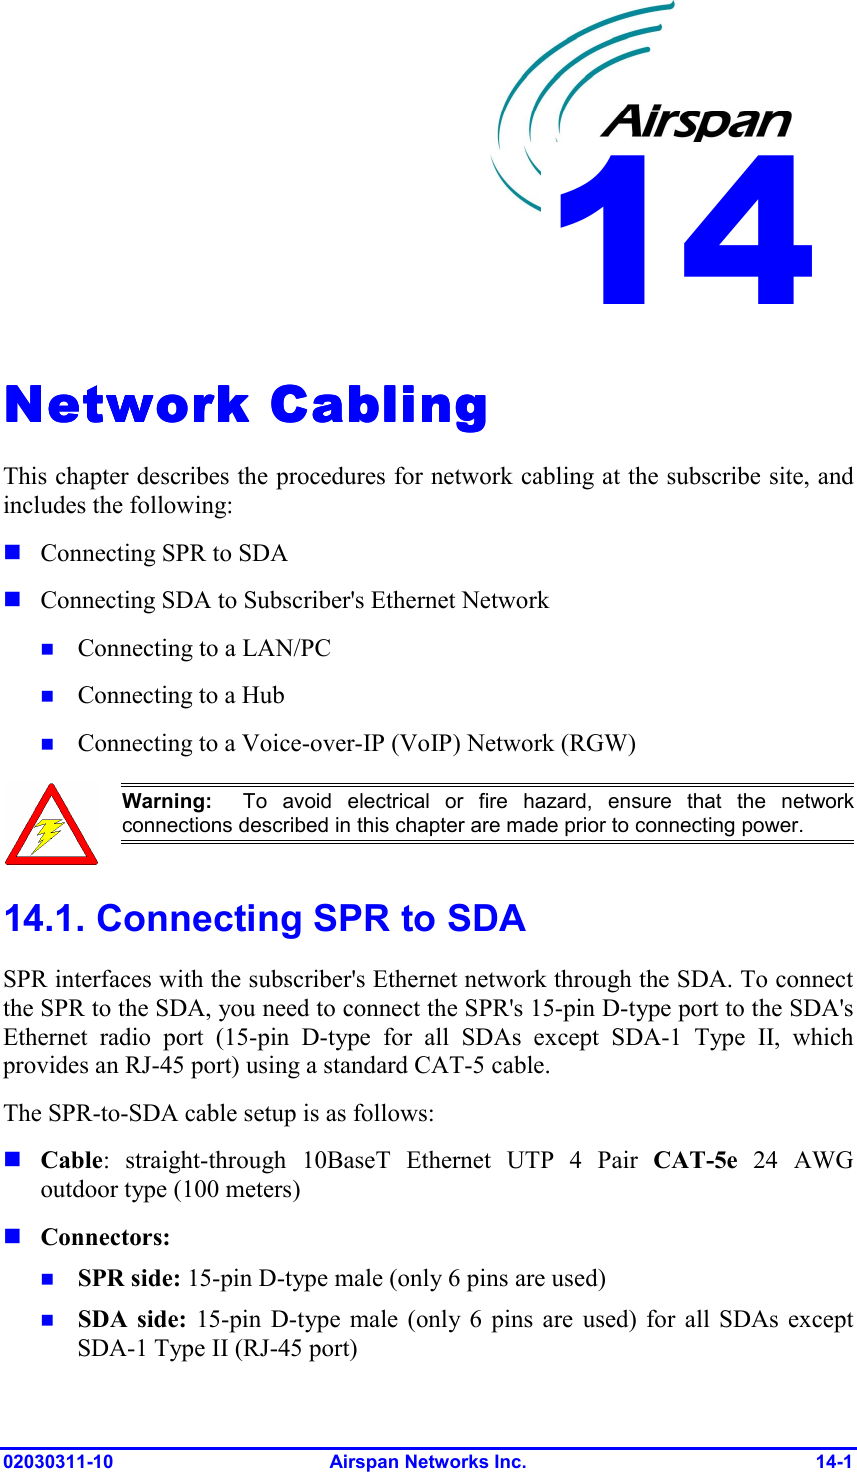  02030311-10 Airspan Networks Inc.  14-1 Network CablingNetwork CablingNetwork CablingNetwork Cabling    This chapter describes the procedures for network cabling at the subscribe site, and includes the following:  Connecting SPR to SDA  Connecting SDA to Subscriber&apos;s Ethernet Network  Connecting to a LAN/PC  Connecting to a Hub  Connecting to a Voice-over-IP (VoIP) Network (RGW)  Warning:  To avoid electrical or fire hazard, ensure that the networkconnections described in this chapter are made prior to connecting power. 14.1. Connecting SPR to SDA SPR interfaces with the subscriber&apos;s Ethernet network through the SDA. To connect the SPR to the SDA, you need to connect the SPR&apos;s 15-pin D-type port to the SDA&apos;s Ethernet radio port (15-pin D-type for all SDAs except SDA-1 Type II, which provides an RJ-45 port) using a standard CAT-5 cable. The SPR-to-SDA cable setup is as follows:  Cable: straight-through 10BaseT Ethernet UTP 4 Pair CAT-5e 24 AWG outdoor type (100 meters)  Connectors:   SPR side: 15-pin D-type male (only 6 pins are used)  SDA side: 15-pin D-type male (only 6 pins are used) for all SDAs except SDA-1 Type II (RJ-45 port) 14 